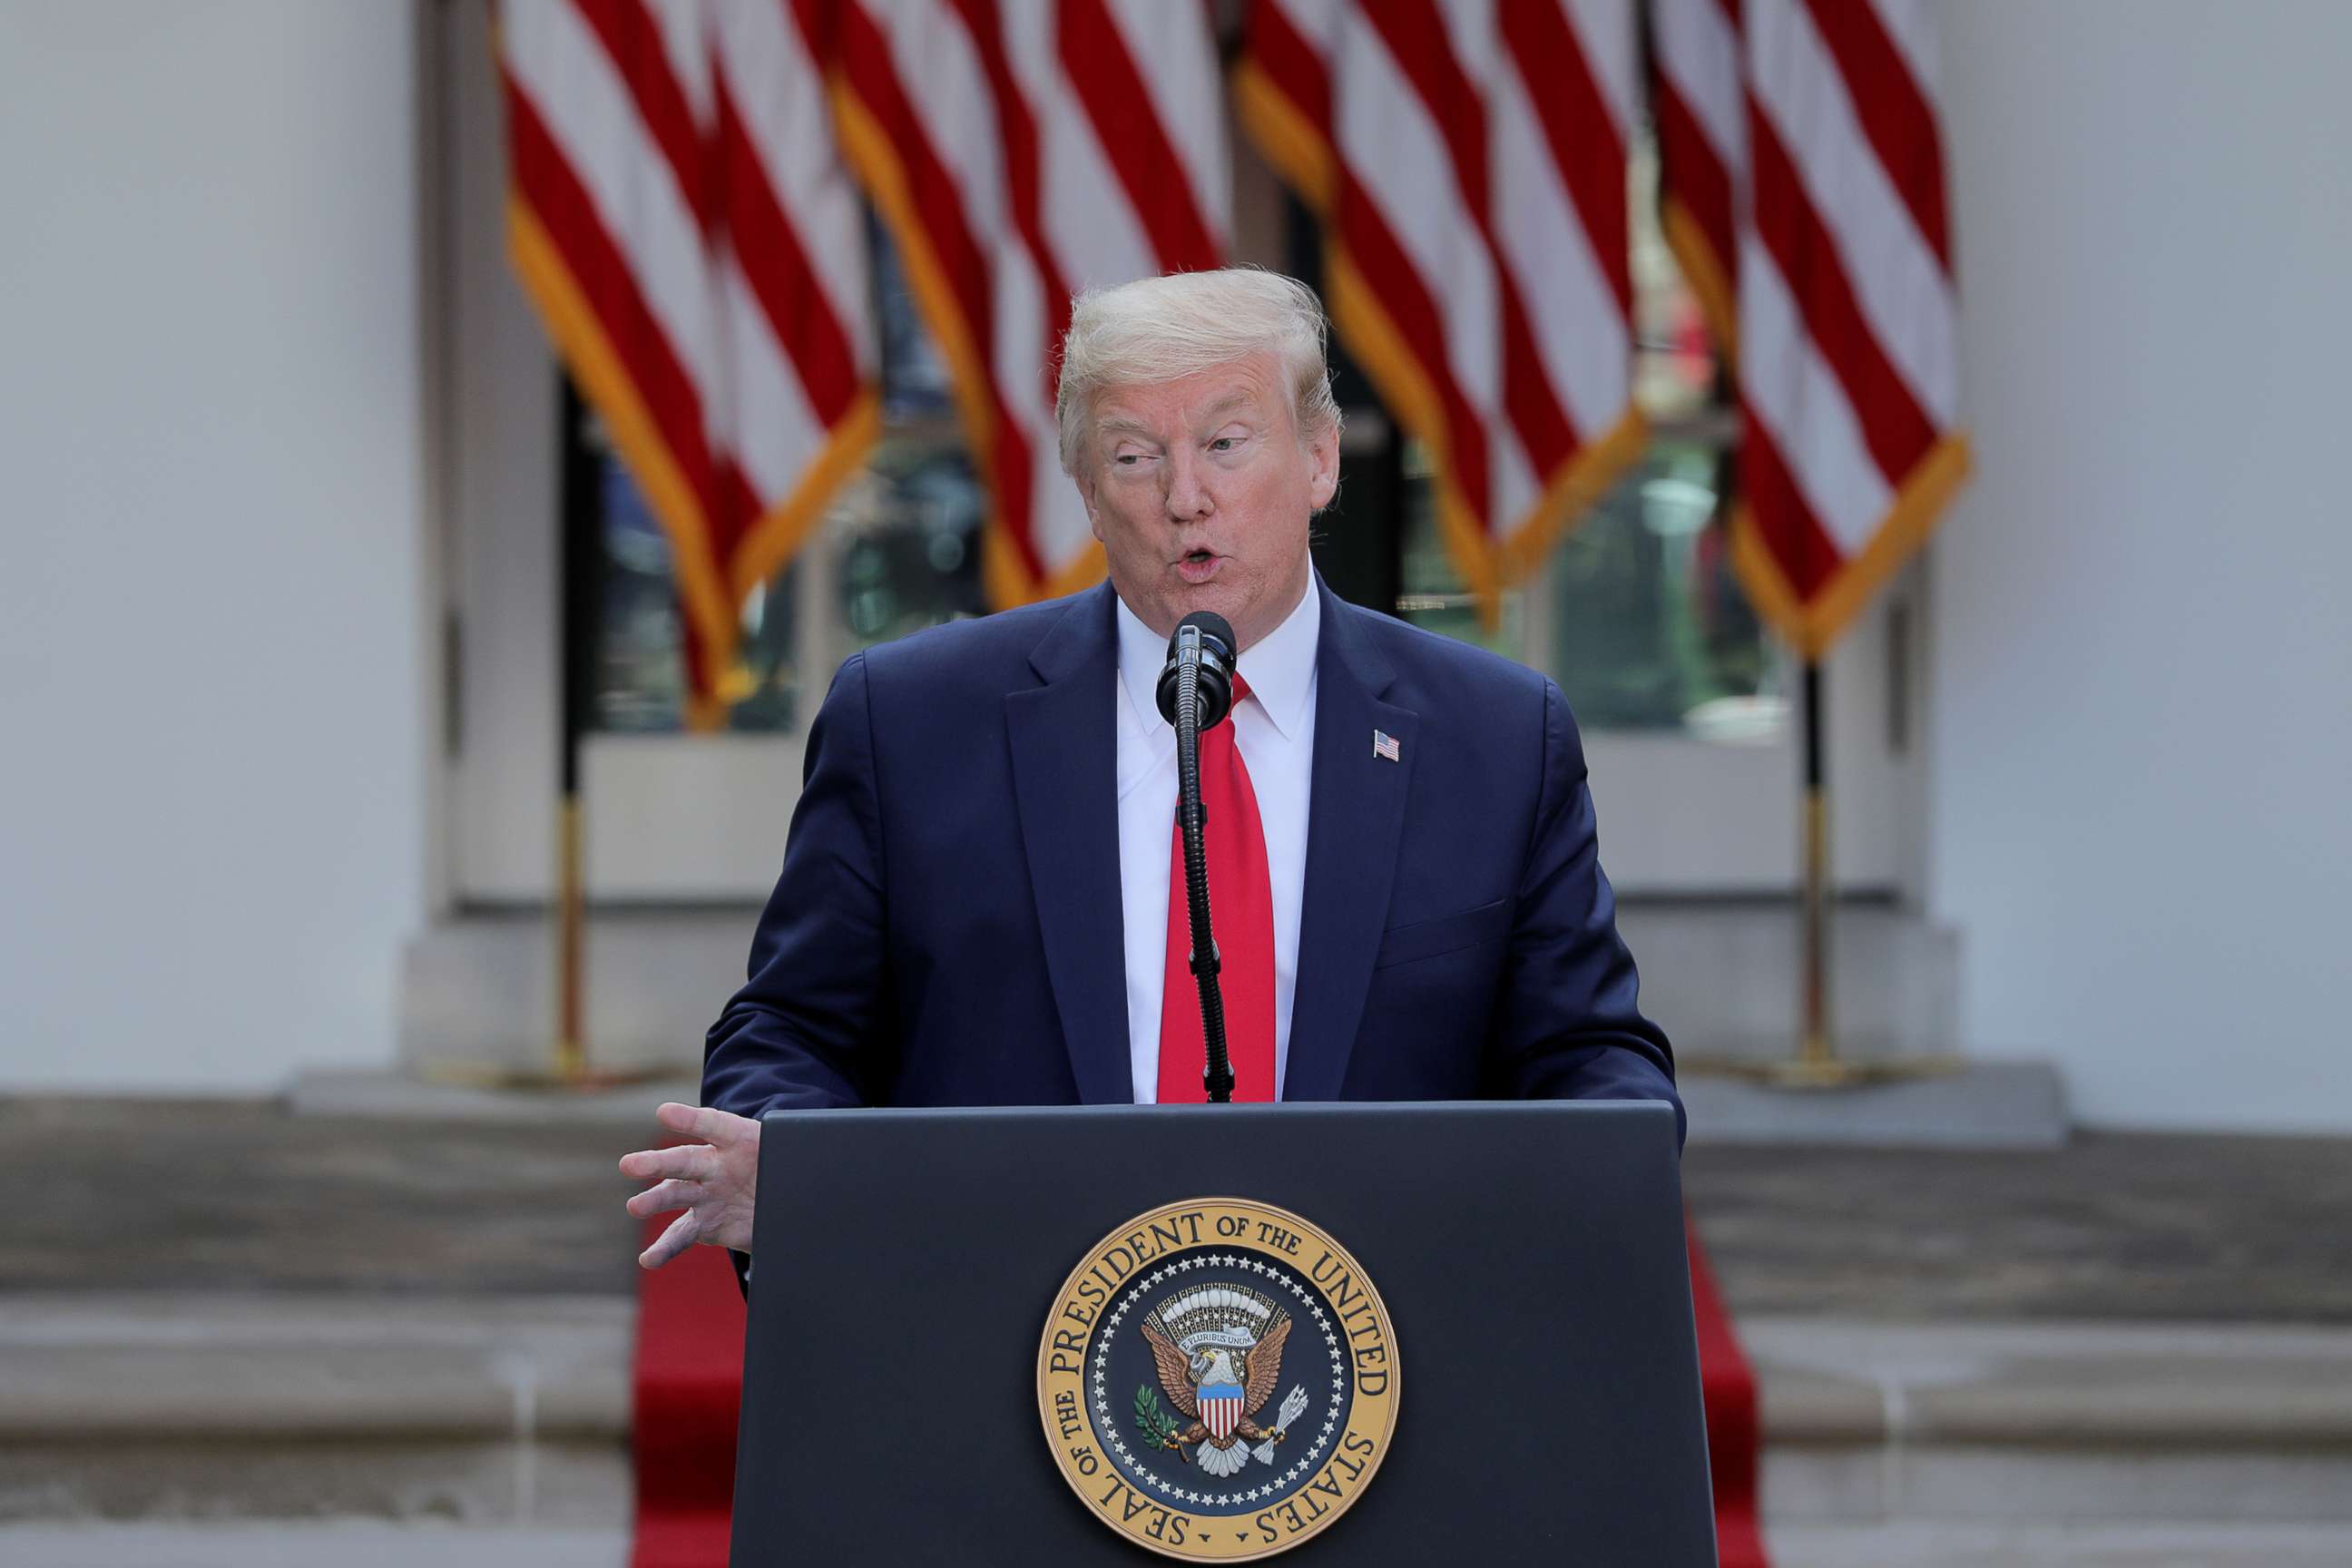 PHOTO: President Donald Trump addresses a coronavirus response news conference in the Rose Garden at the White House in Washington, April 27, 2020.